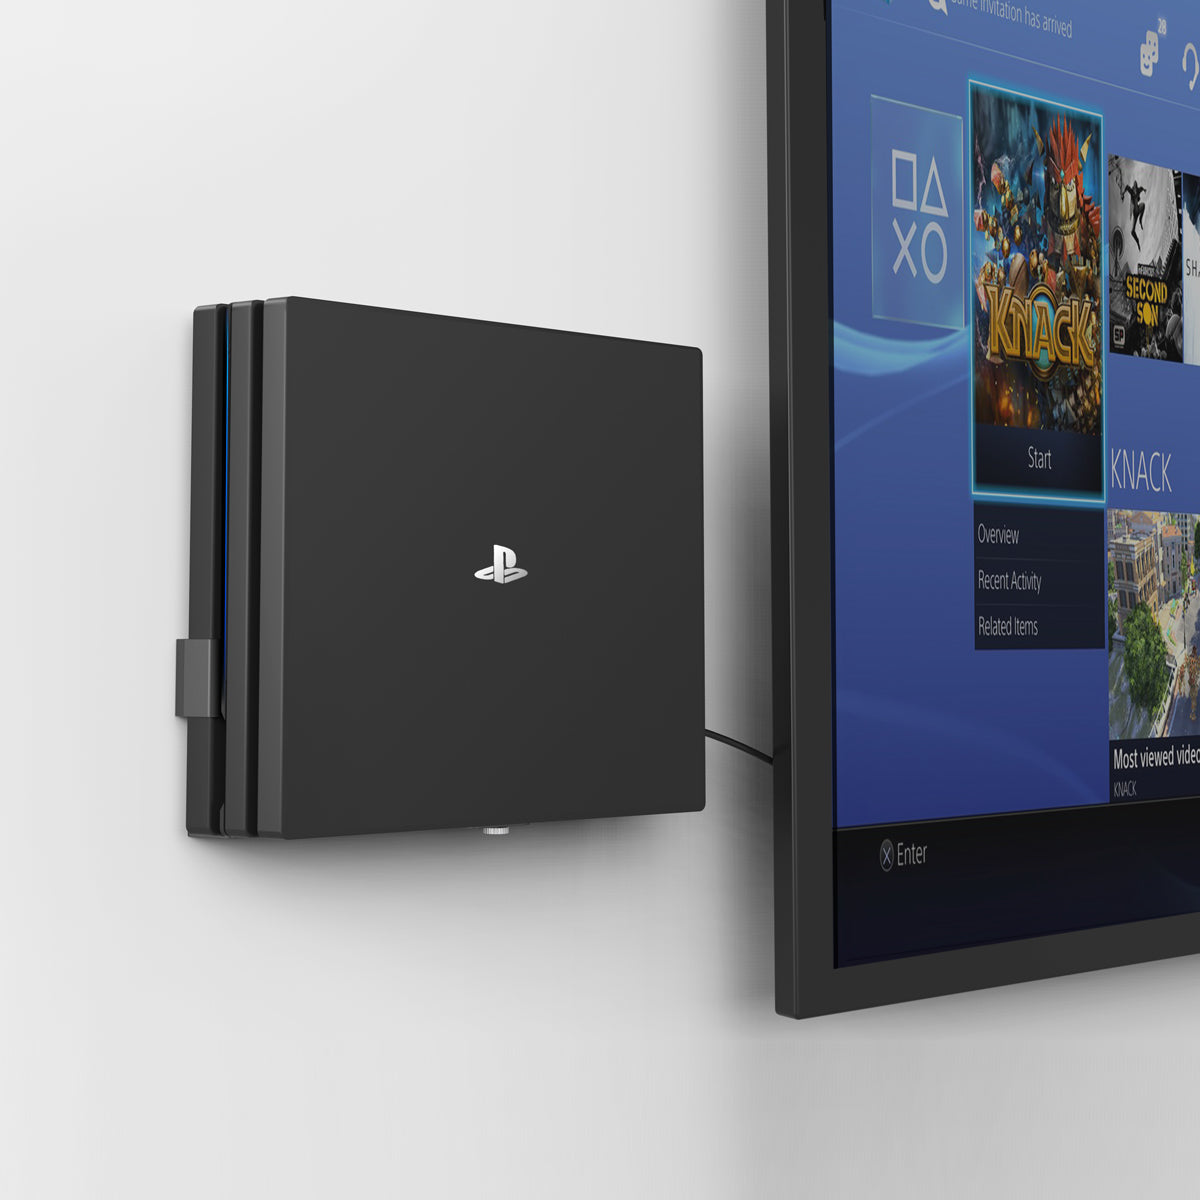 ps4 mounted to wall